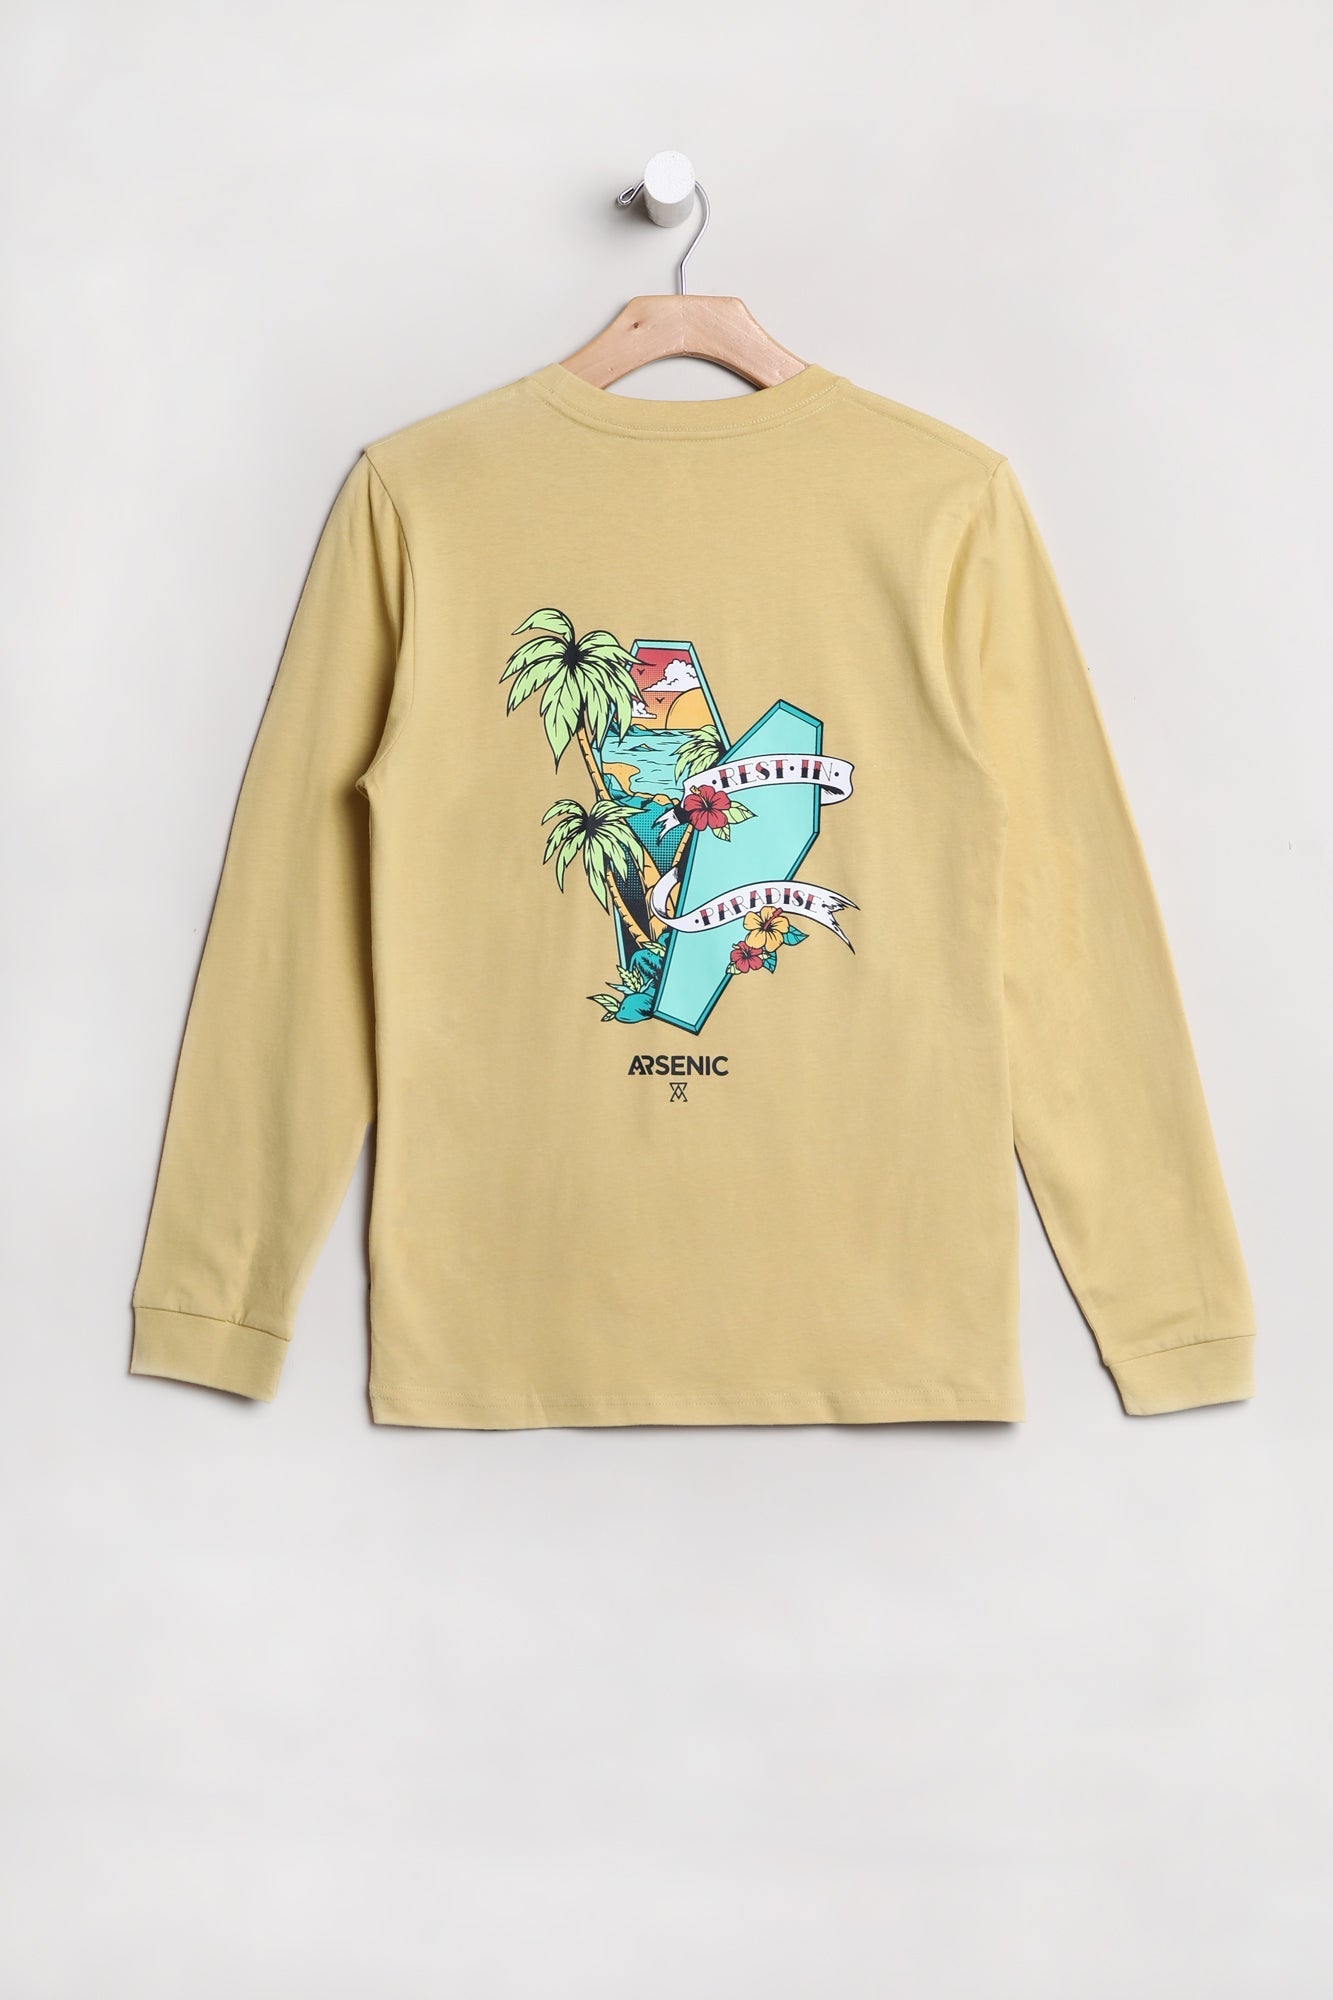 Arsenic Youth Rest Paradise Long Sleeve Top - Pale Yellow /